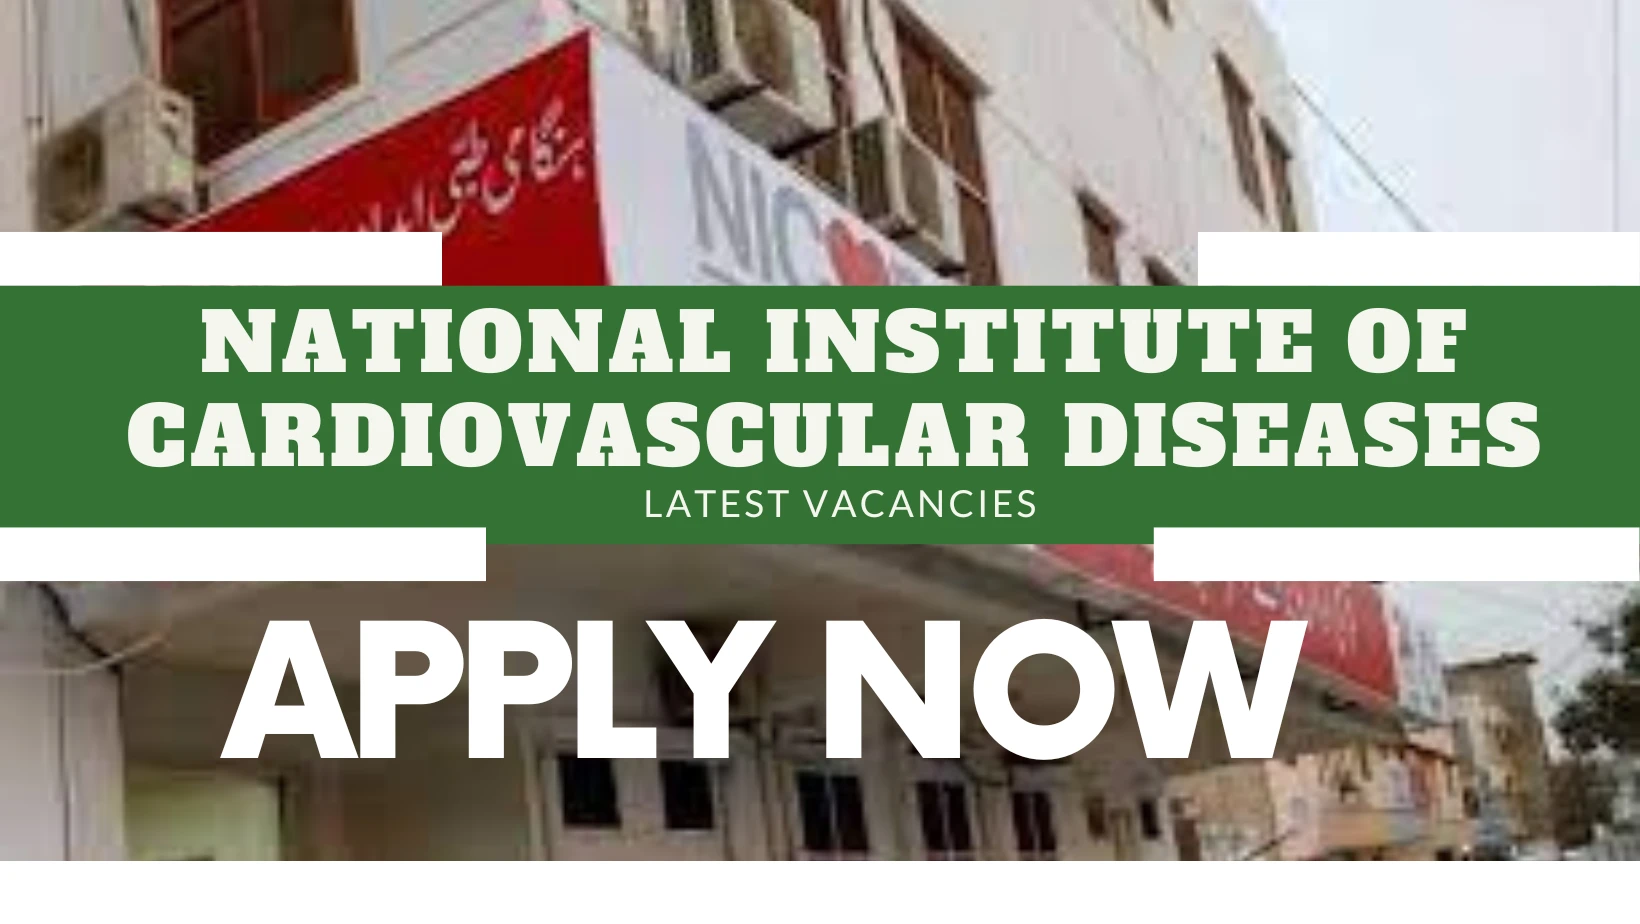 NATIONAL INSTITUTE OF CARDIOVASCULAR DISEASES (NICVD)